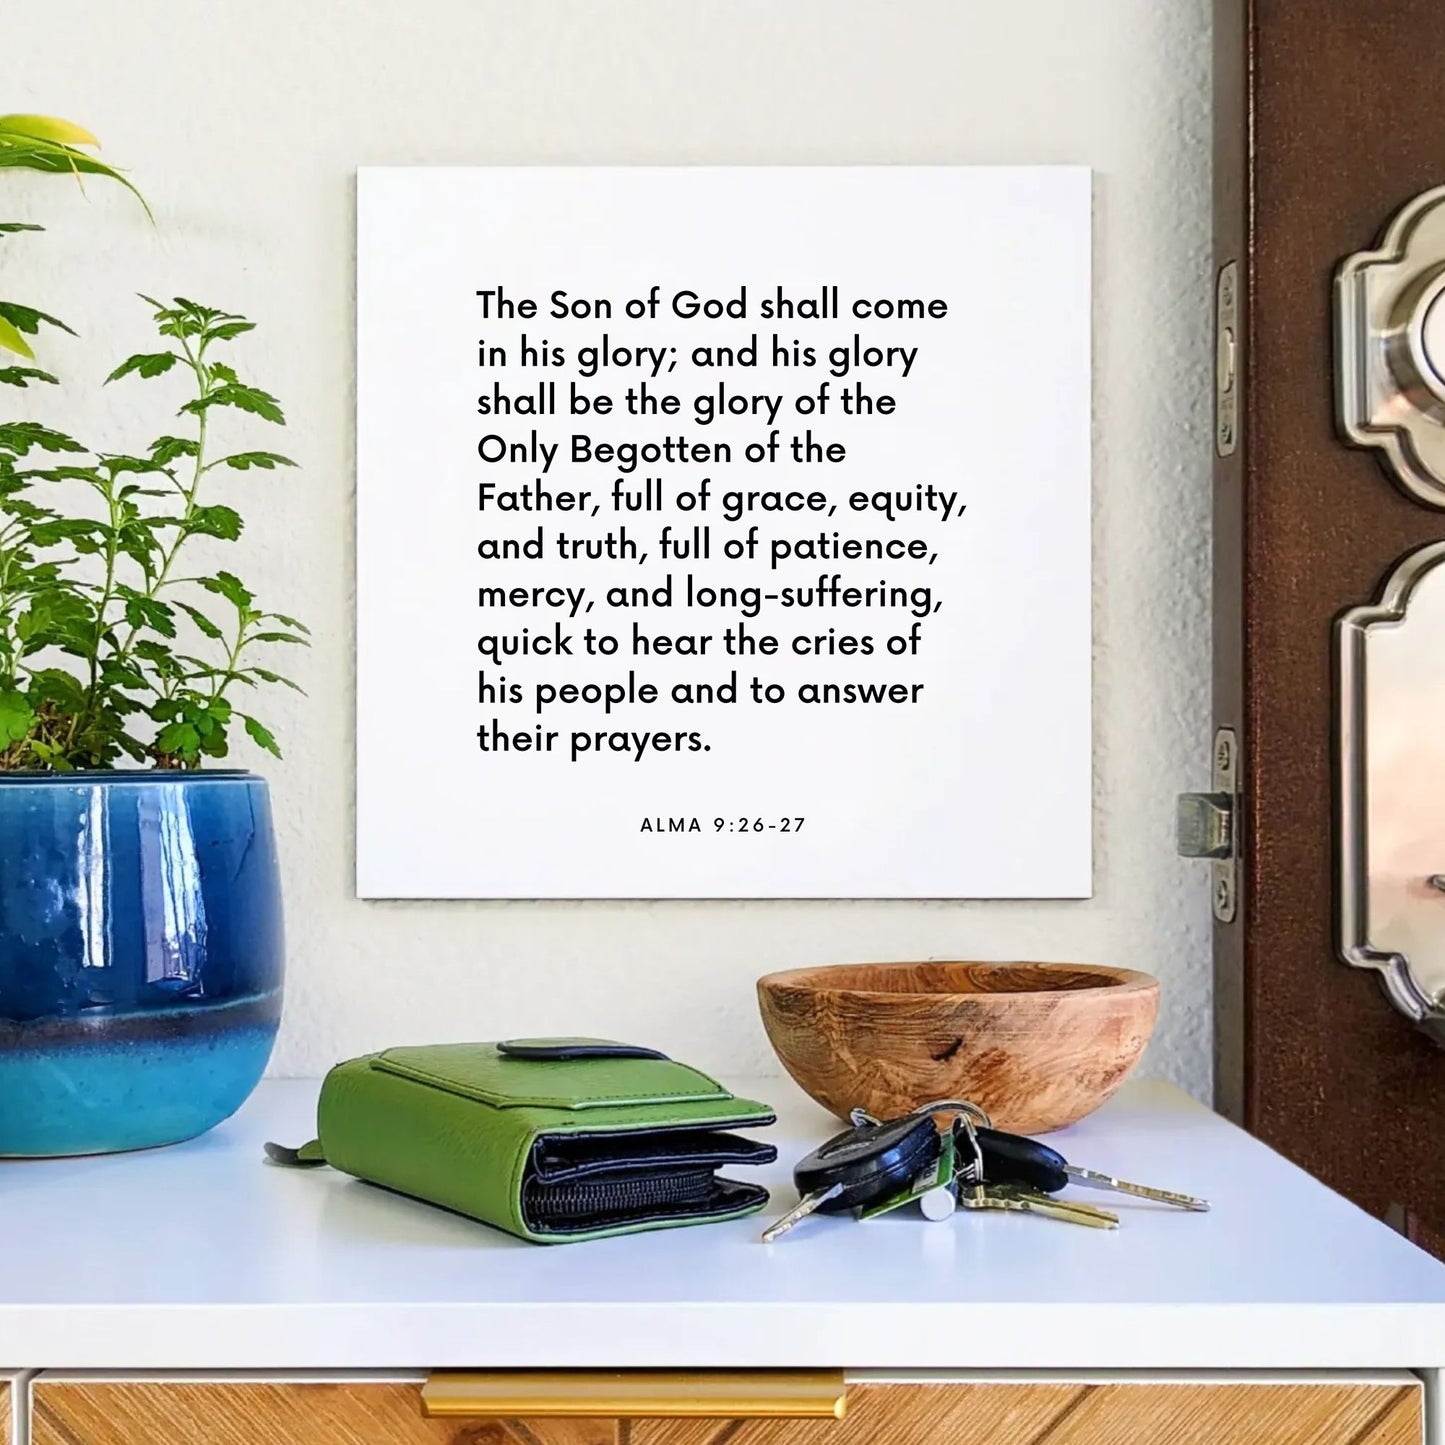 Entryway mouting of the scripture tile for Alma 9:26-27 - "The Son of God shall come in his glory"